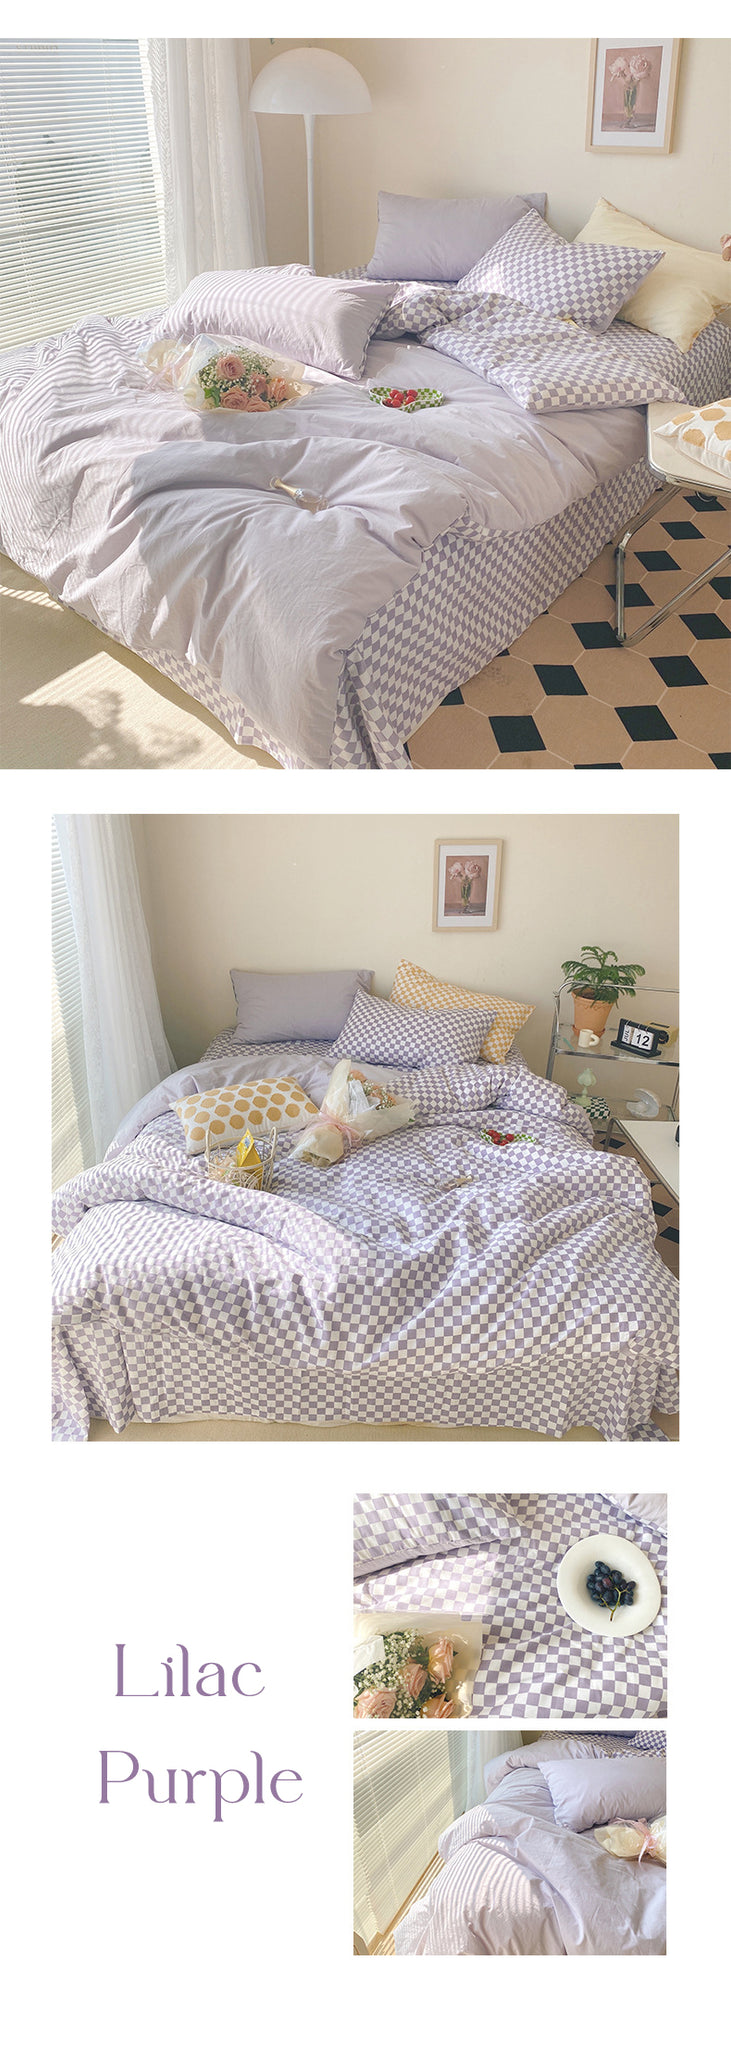 Purple Checkered Pattern Bedsheets For Aesthetic Room